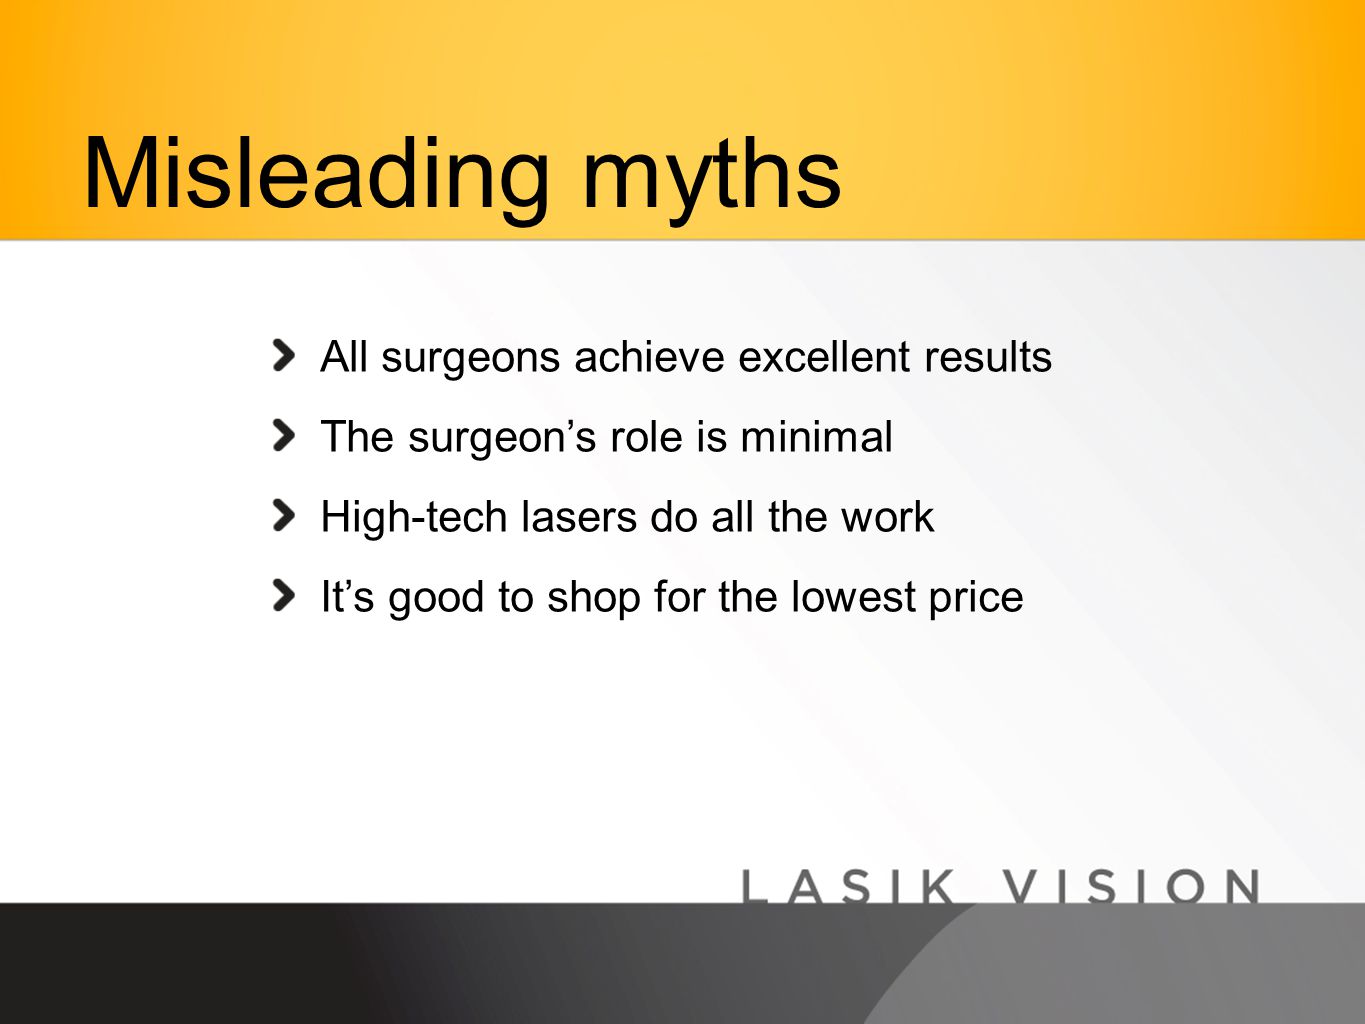 All surgeons achieve excellent results The surgeon’s role is minimal High-tech lasers do all the work It’s good to shop for the lowest price Misleading myths